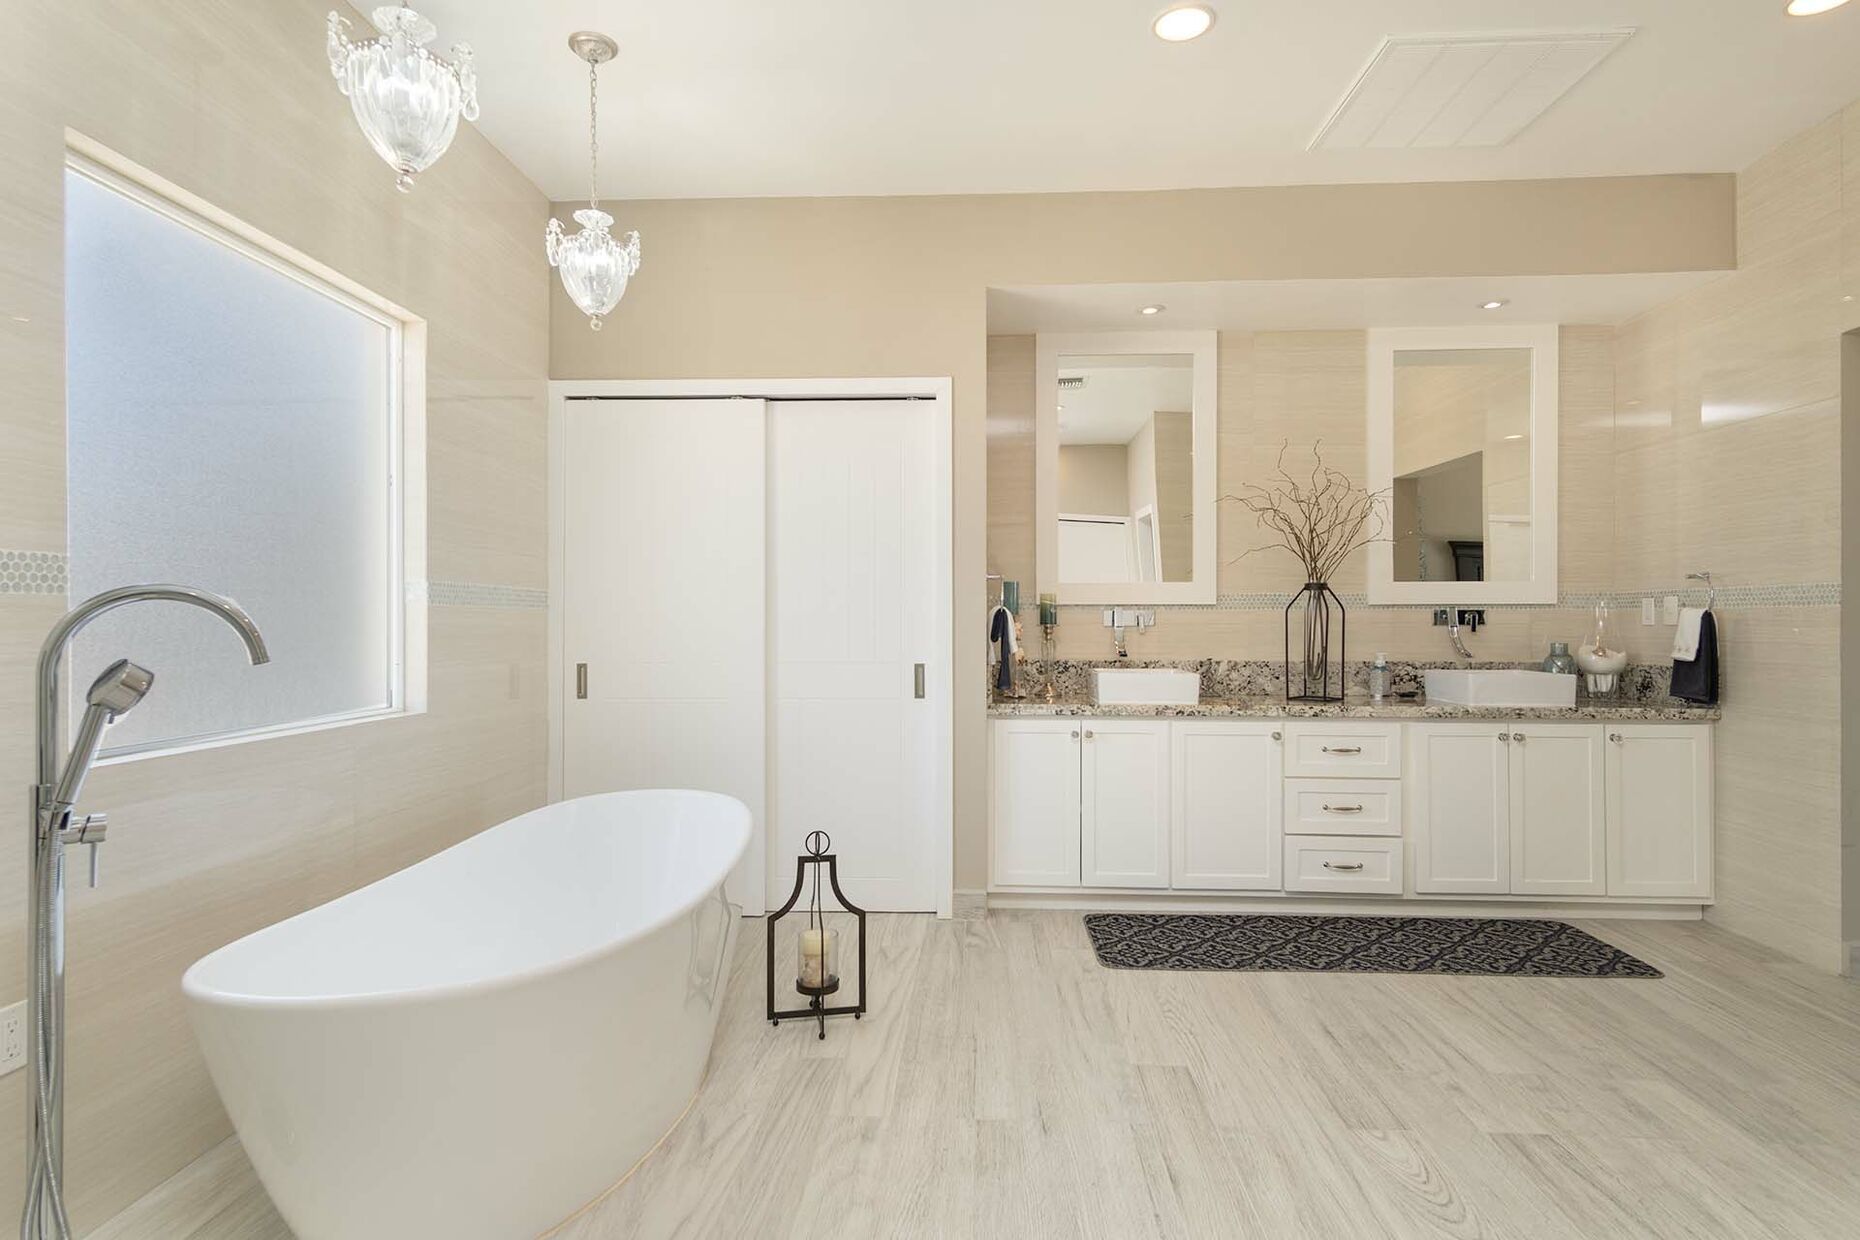 The master bathroom is ample and elegant.